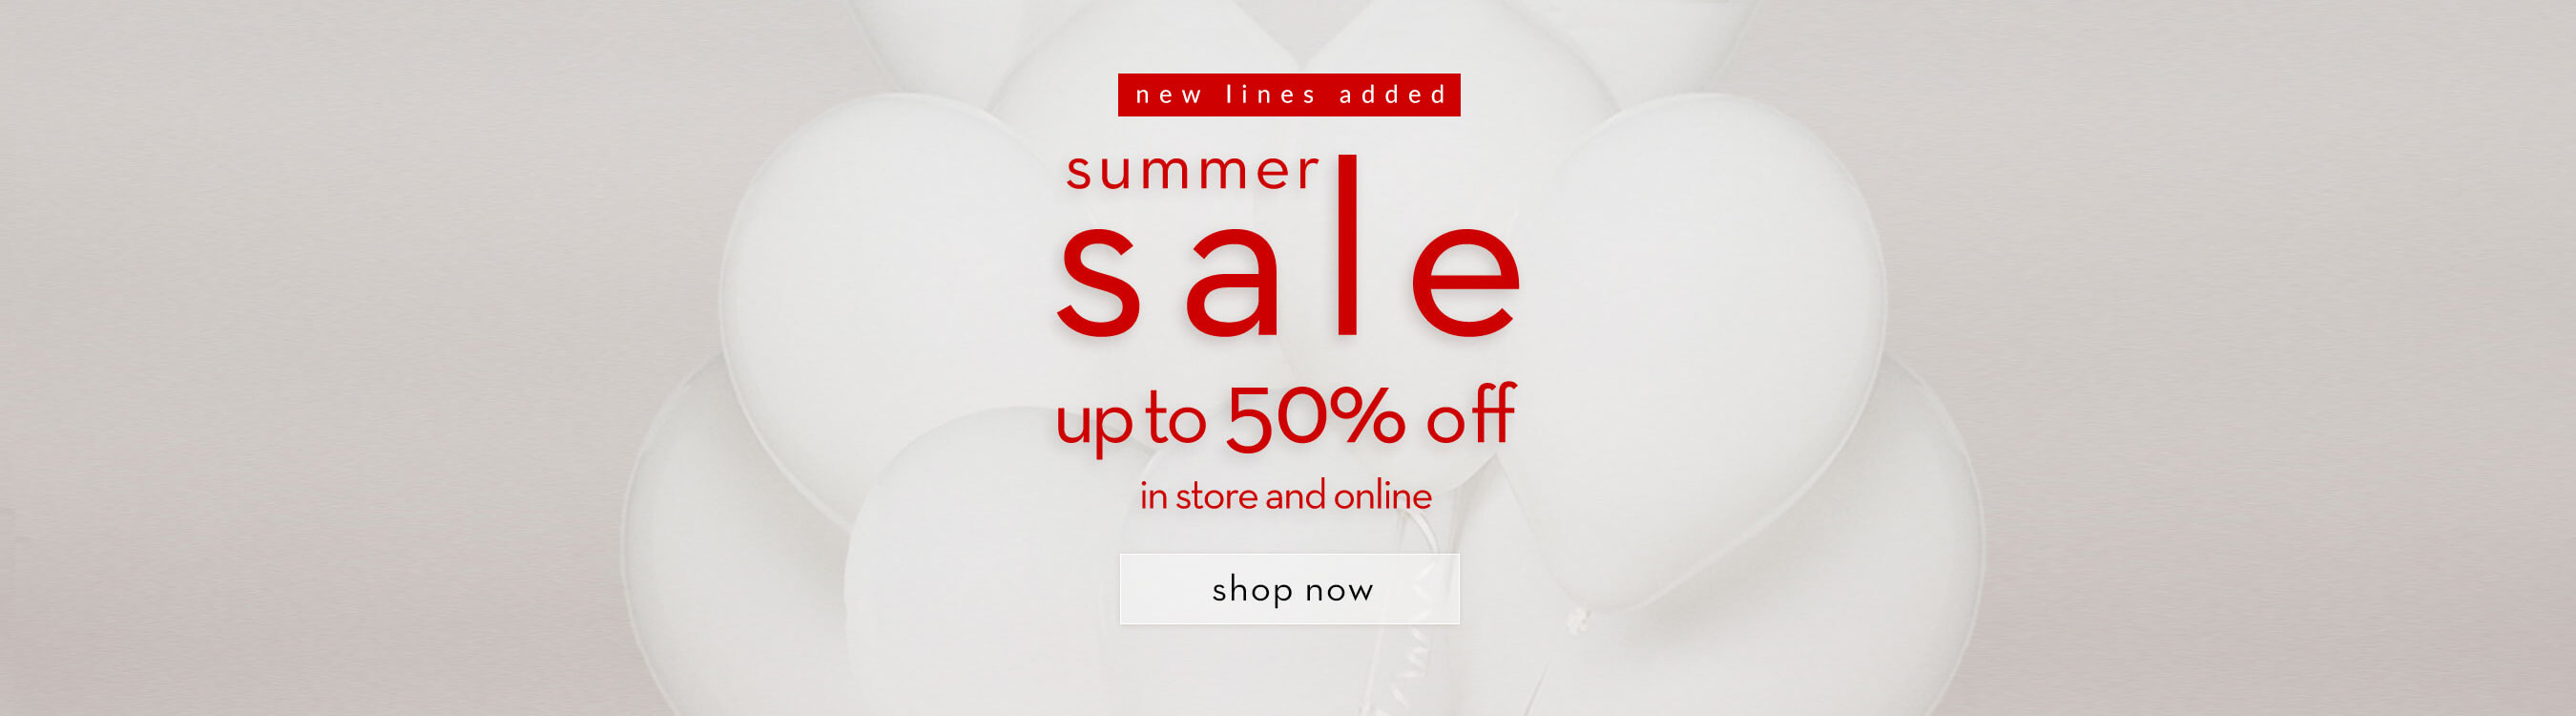 Jacques Vert: Sale up to 50% off ladies clothes